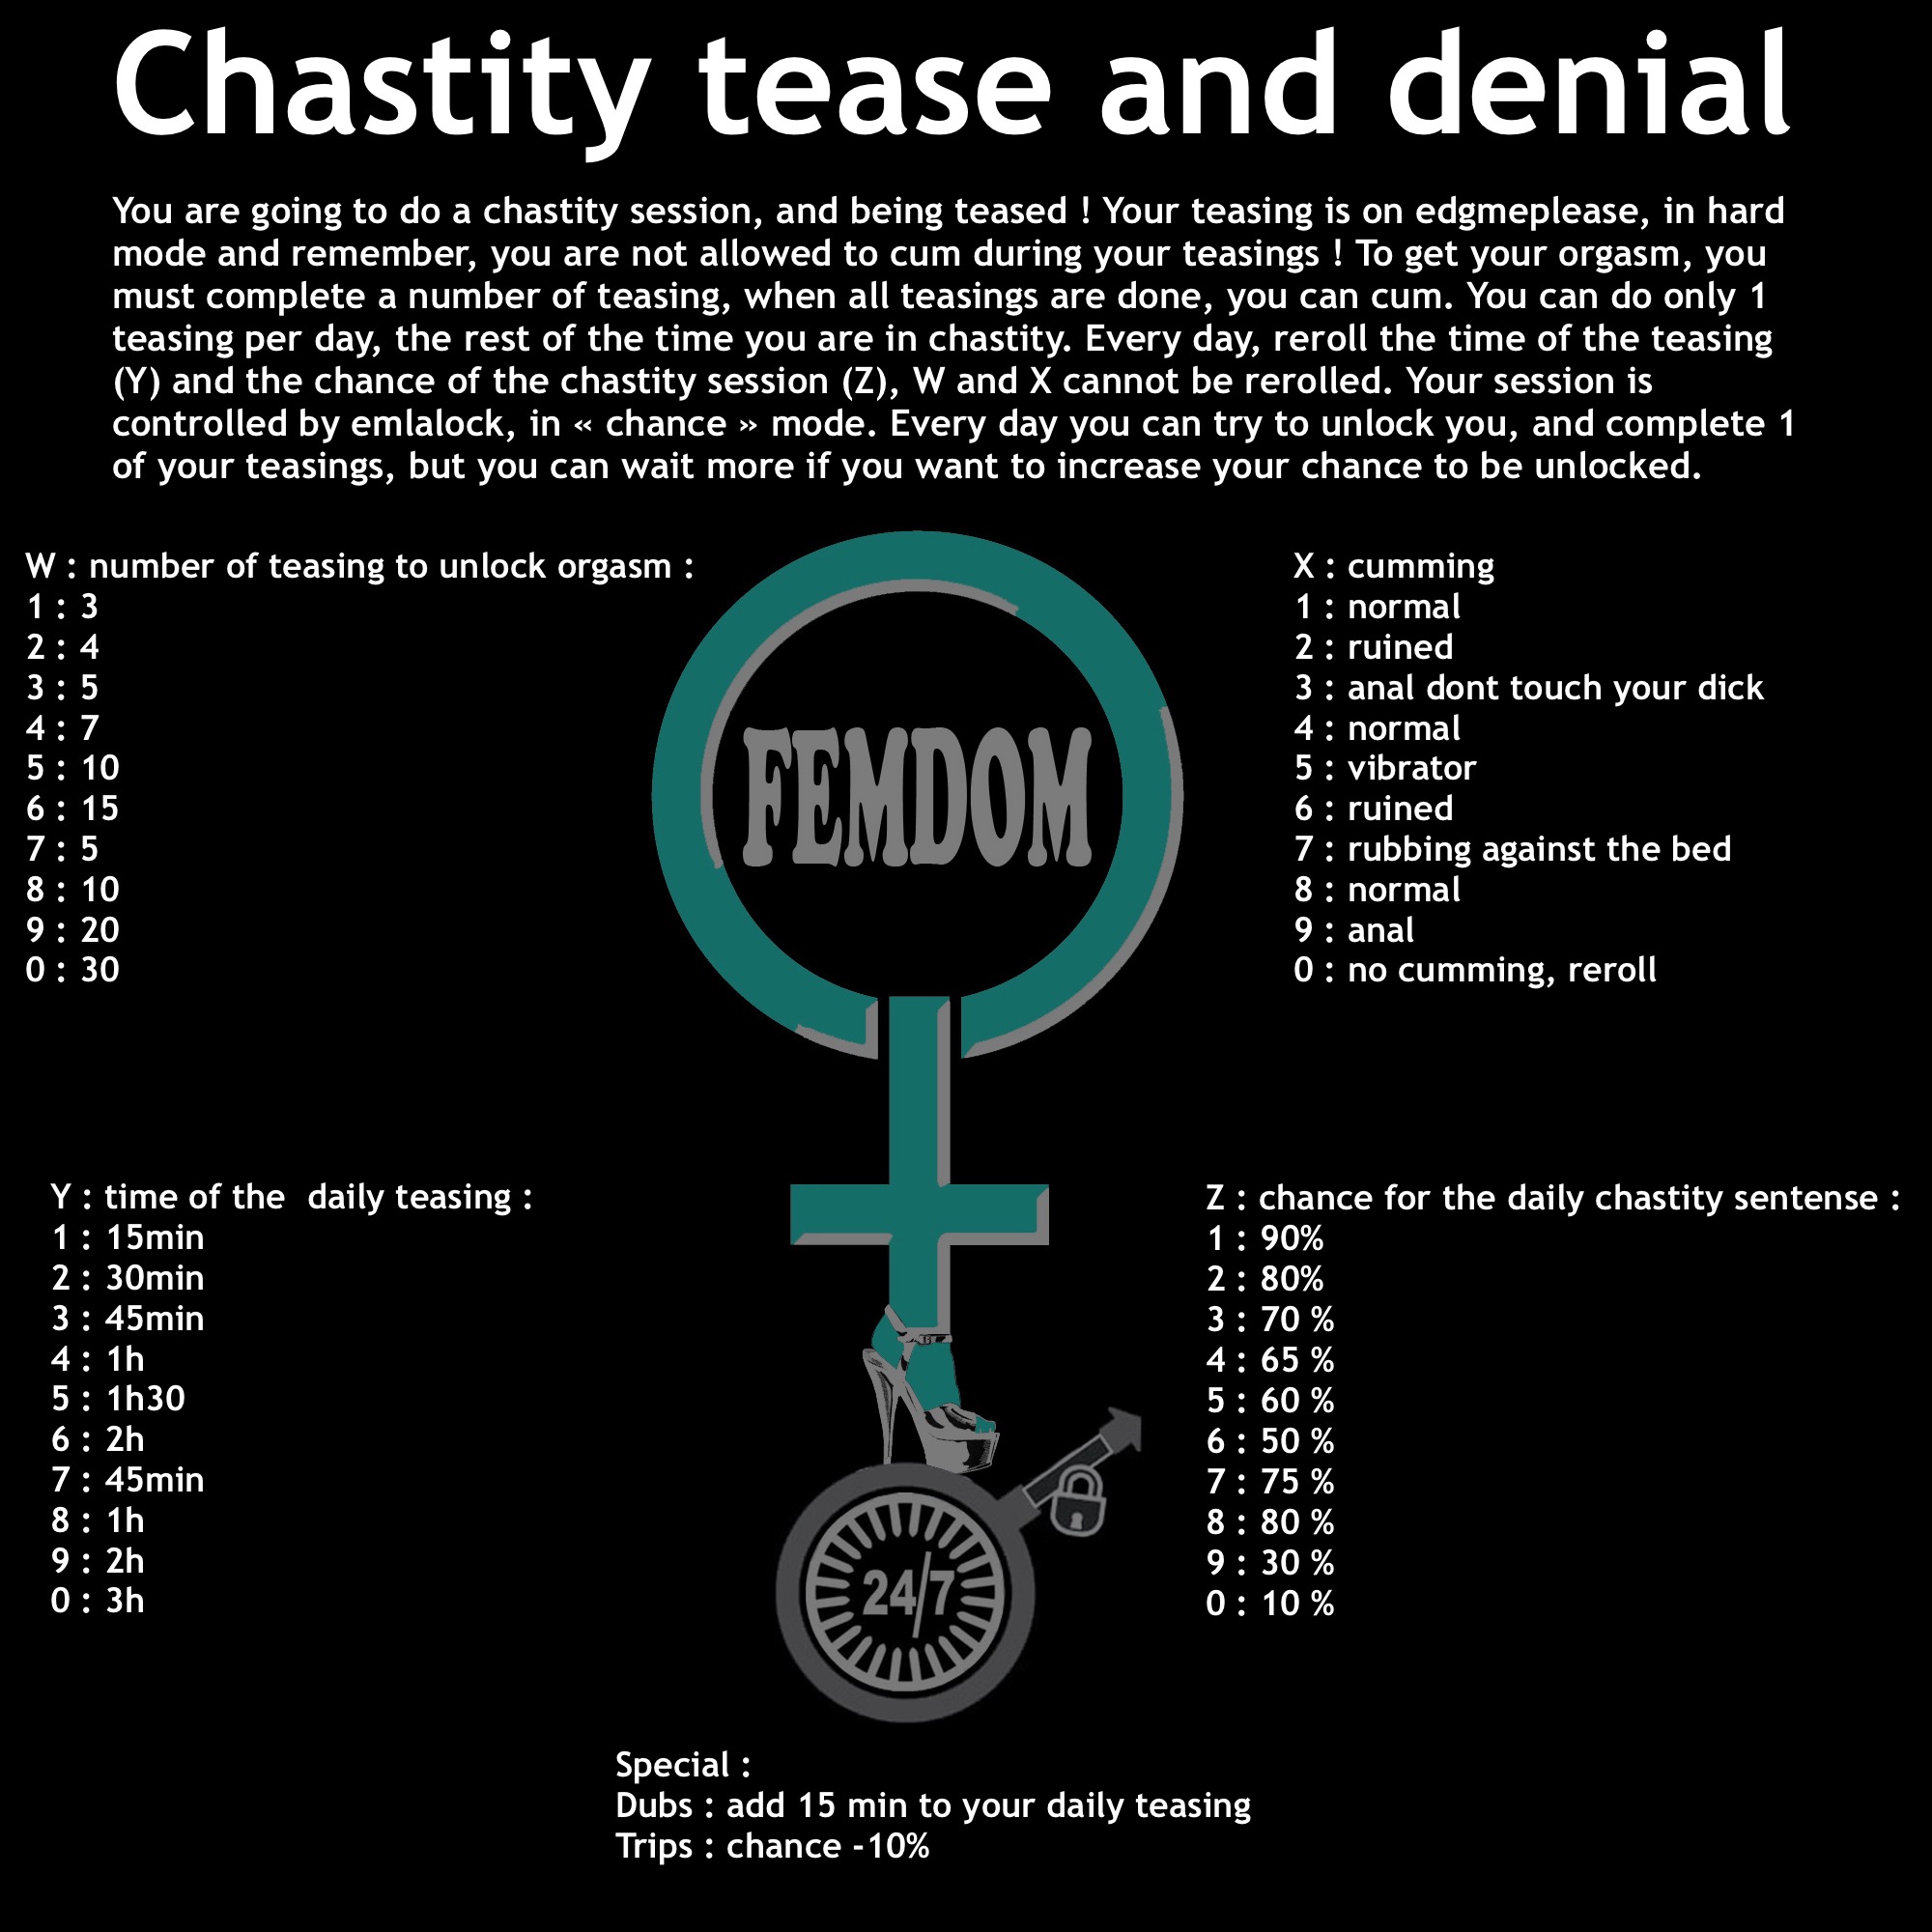 Tease and denial chastity